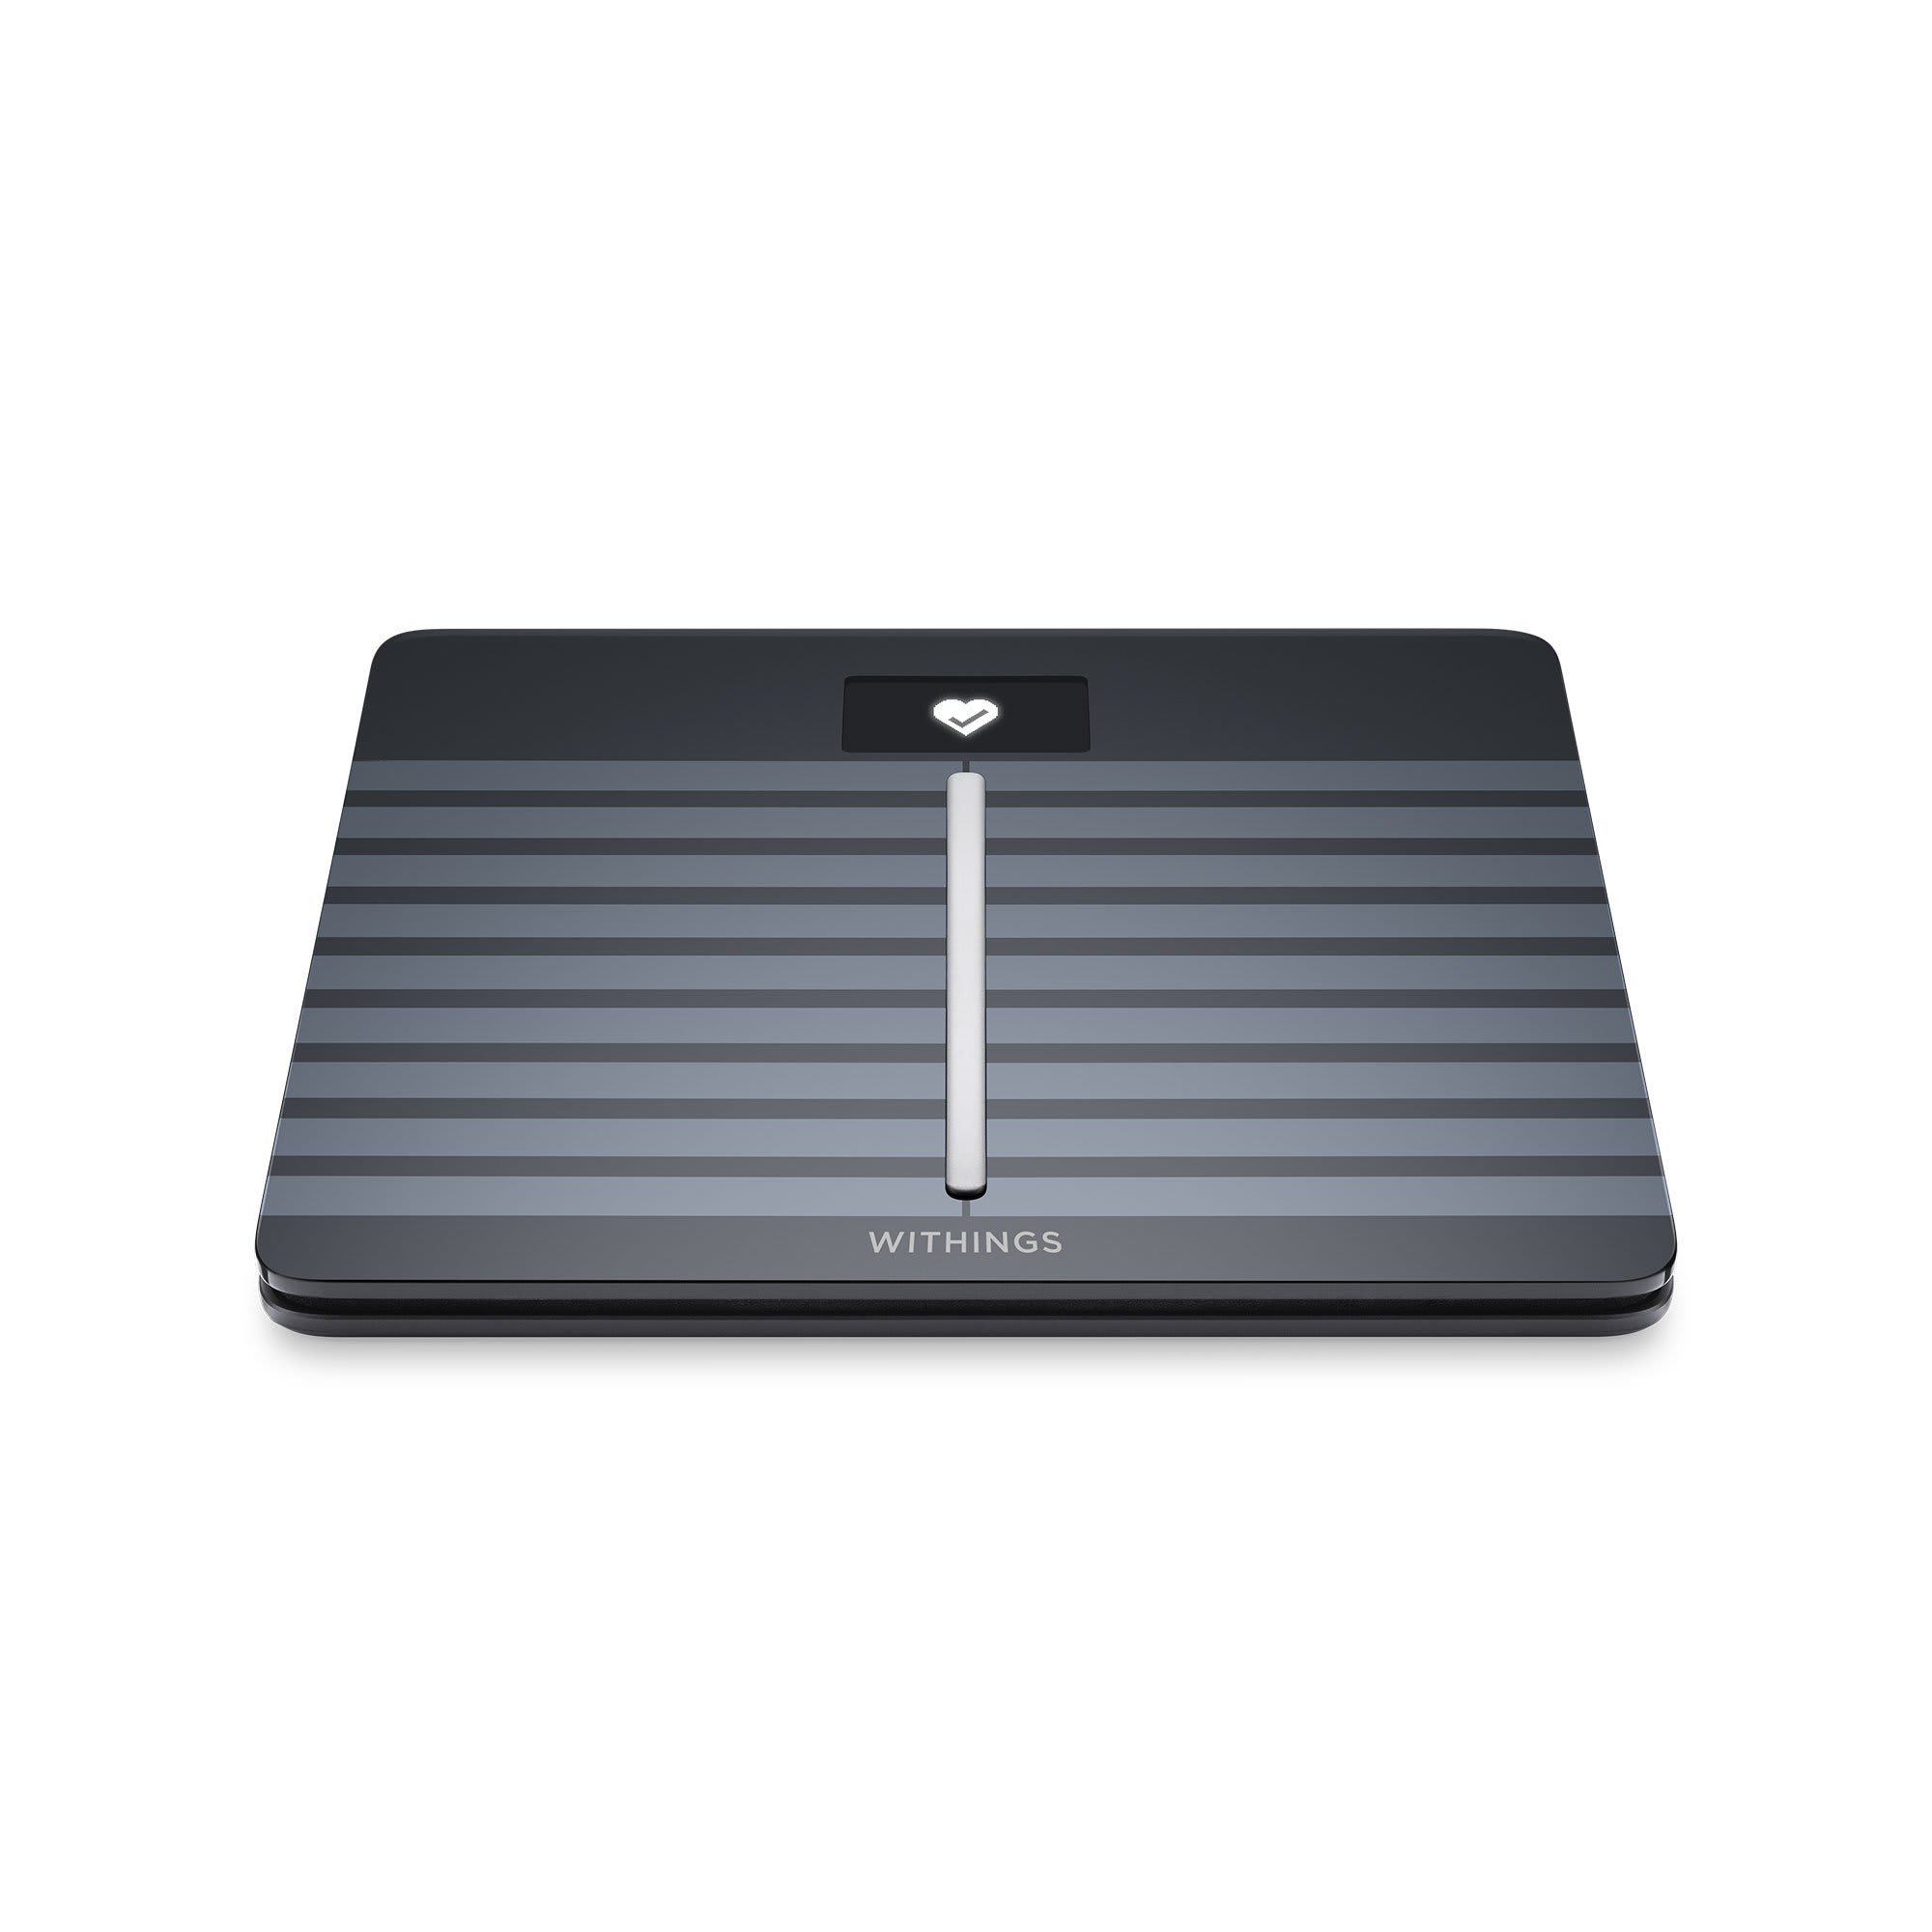 The Withings Body Cardio Scale Gives You a Heart Checkup